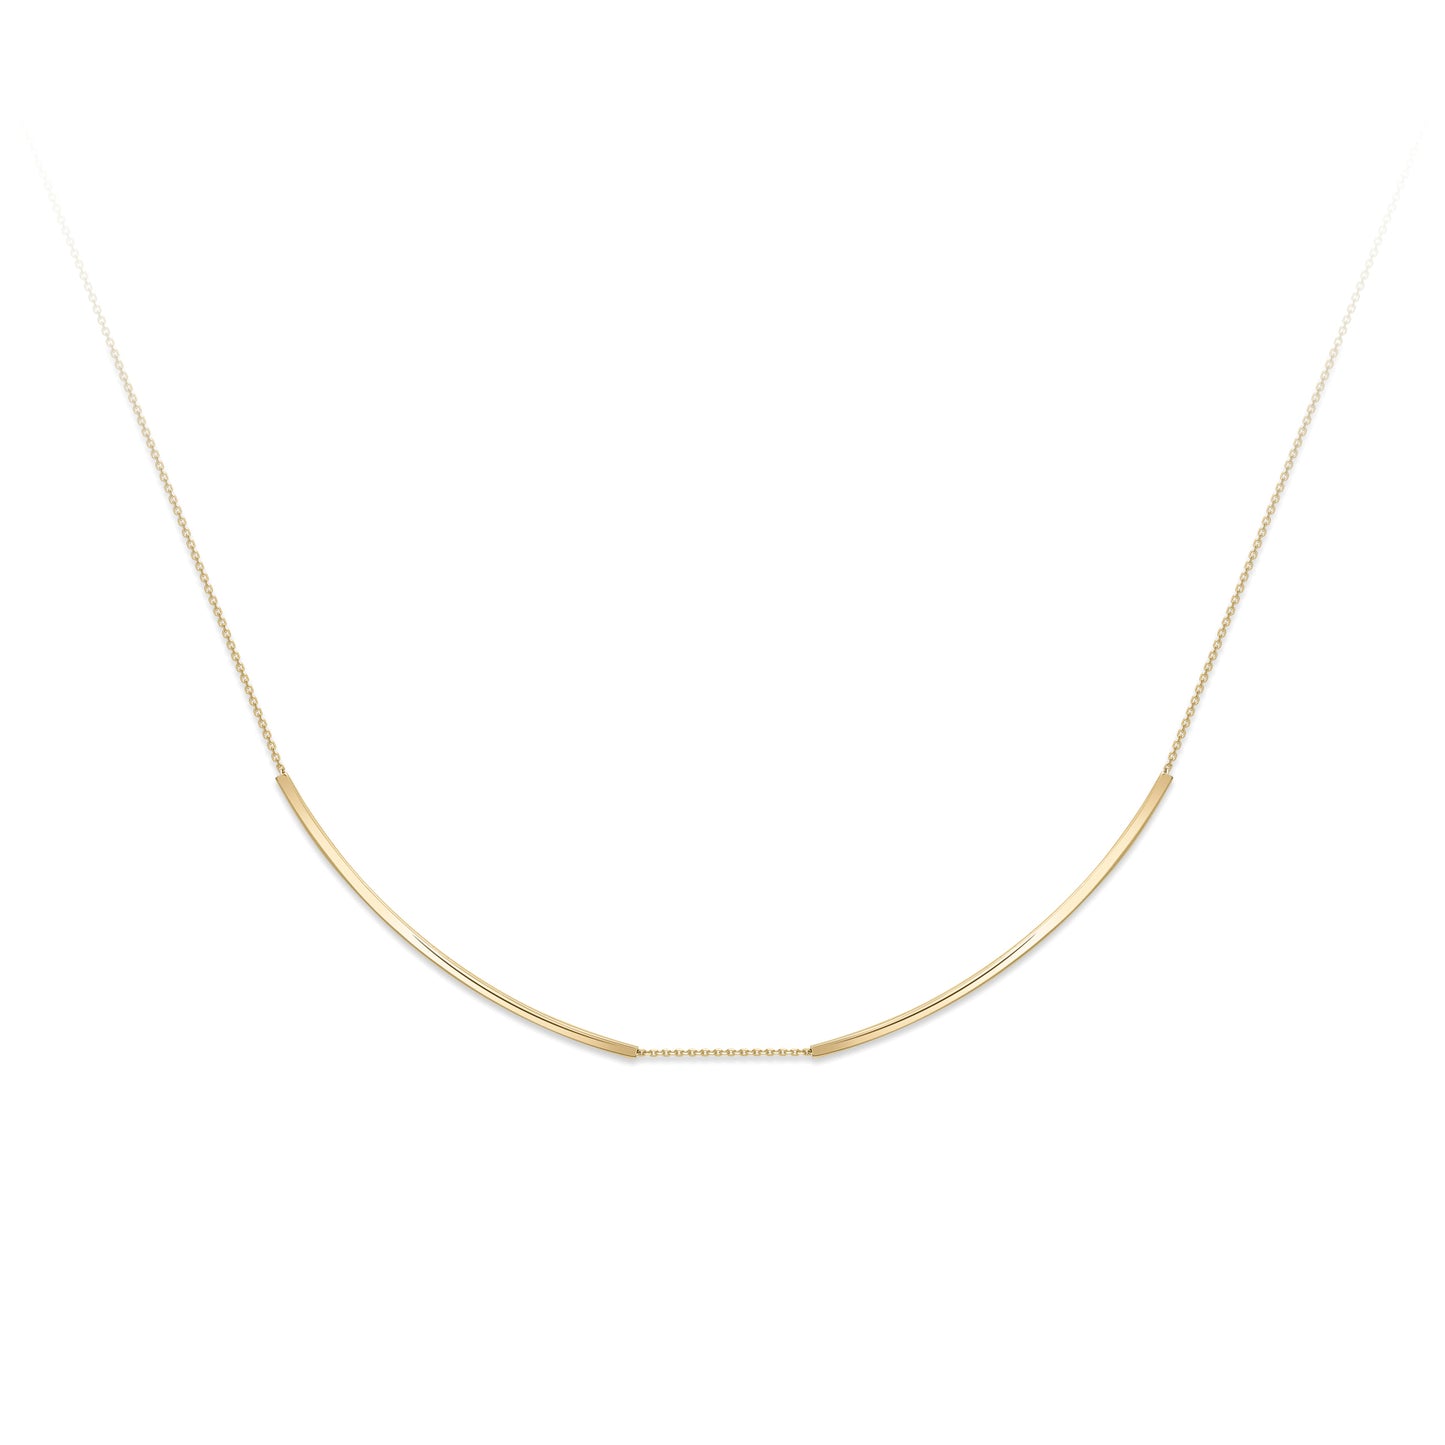 9ct Gold  Curved Bars Necklace - CNNR02146-17